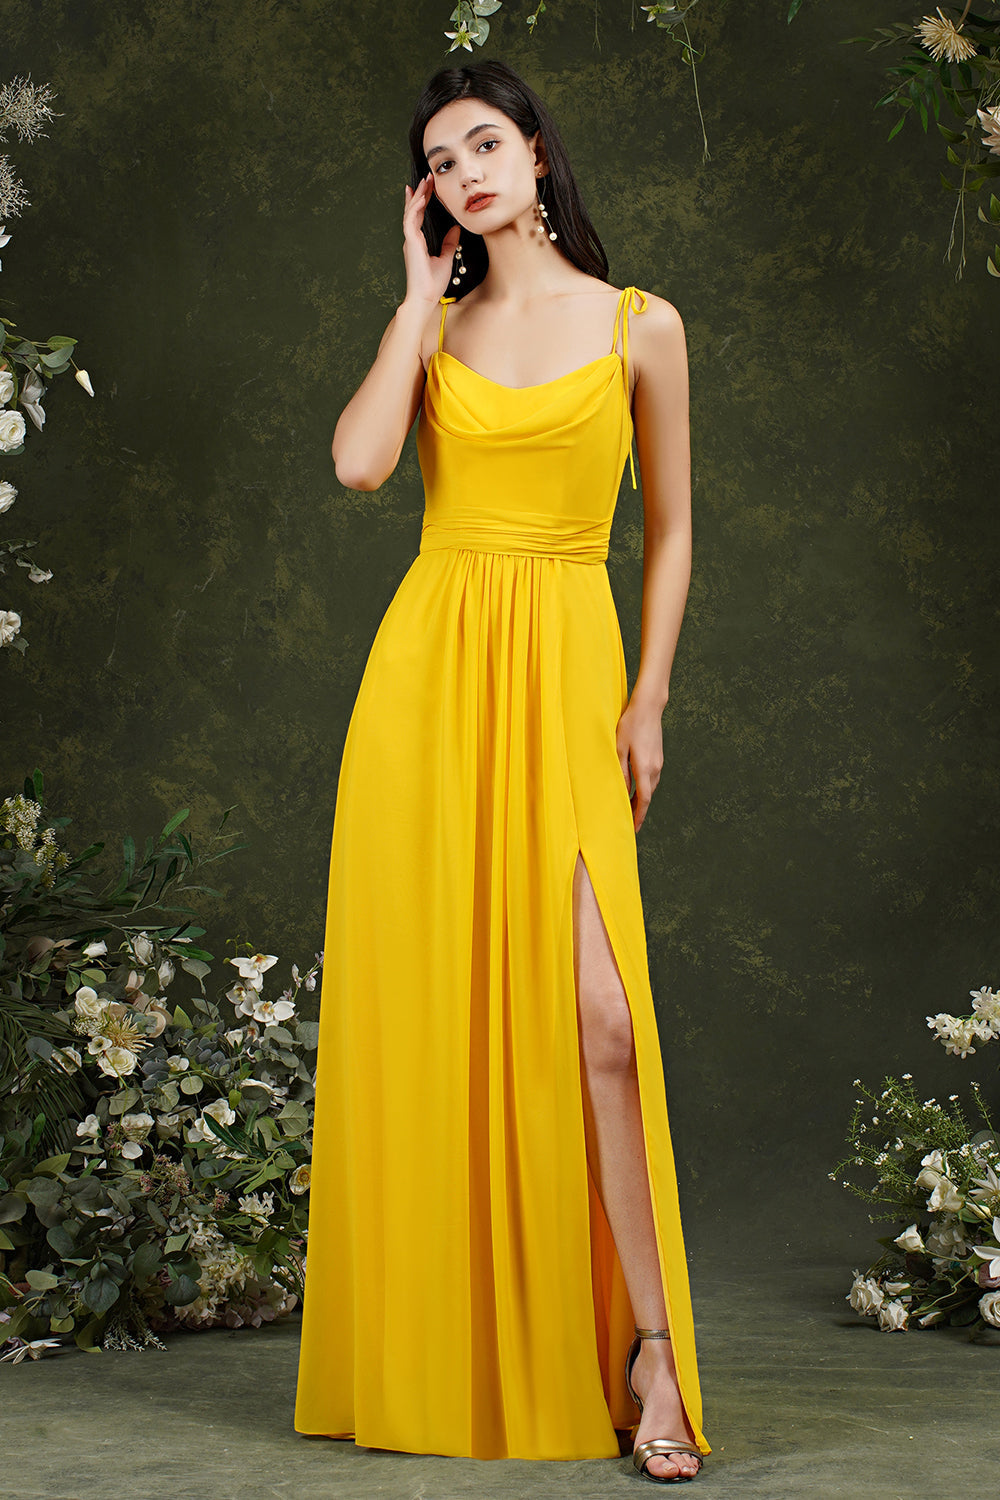 Load image into Gallery viewer, Simple Long A-Line Chiffon Spaghetti Straps Backless Bridesmaid Dress With Slit-BIZTUNNEL
